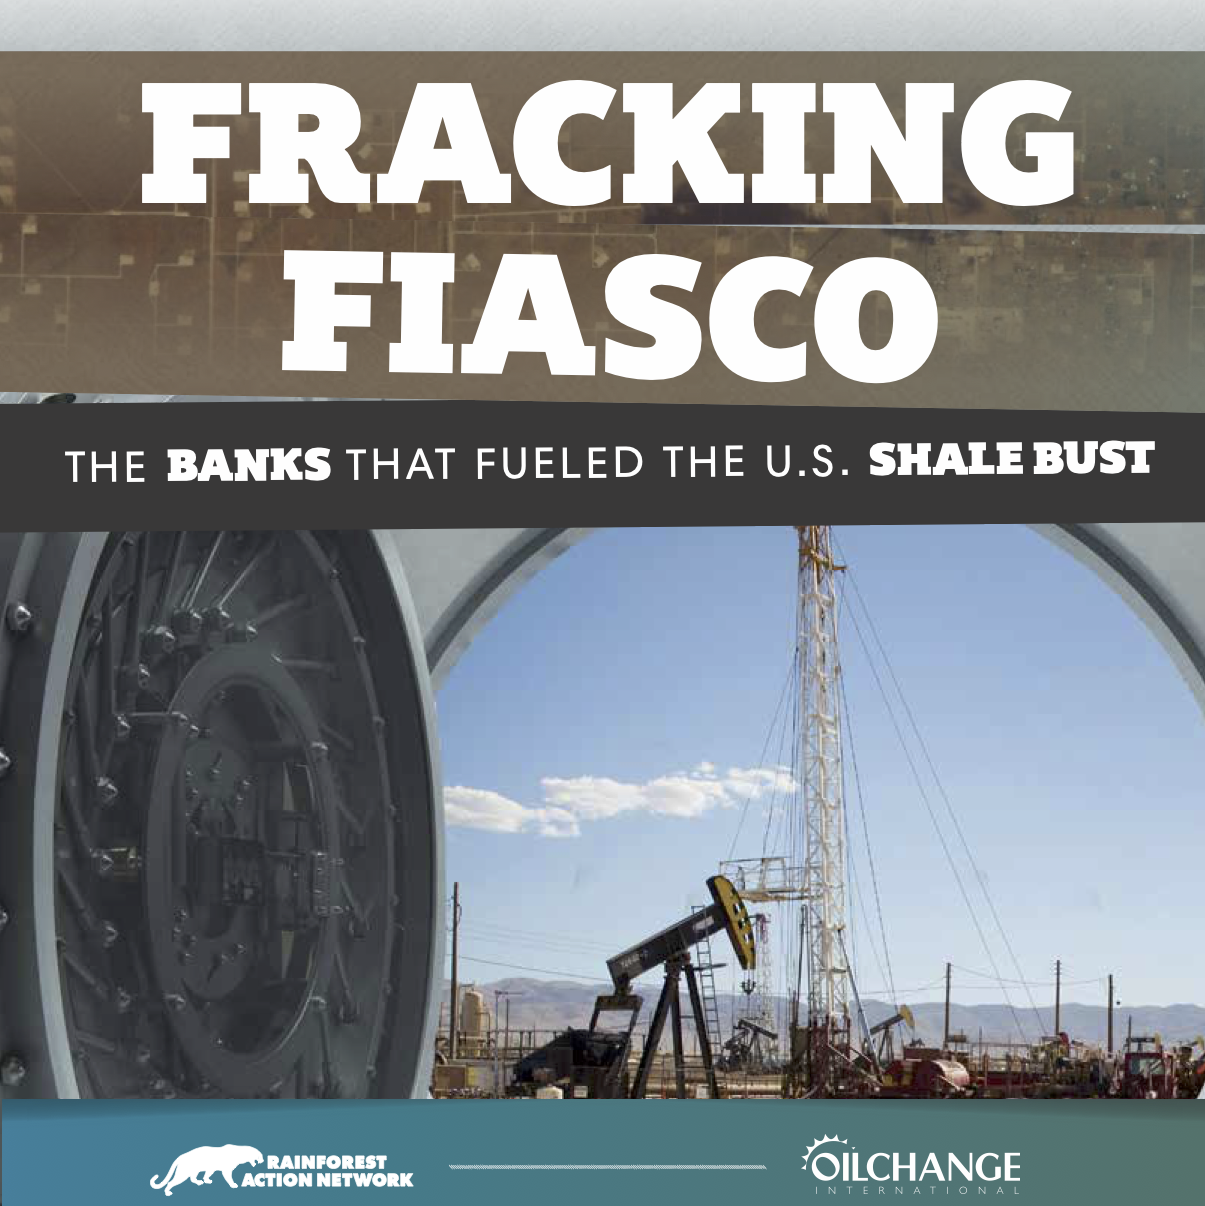 Fracking Fiasco: The Banks That Fueled the U.S. Shale Bust